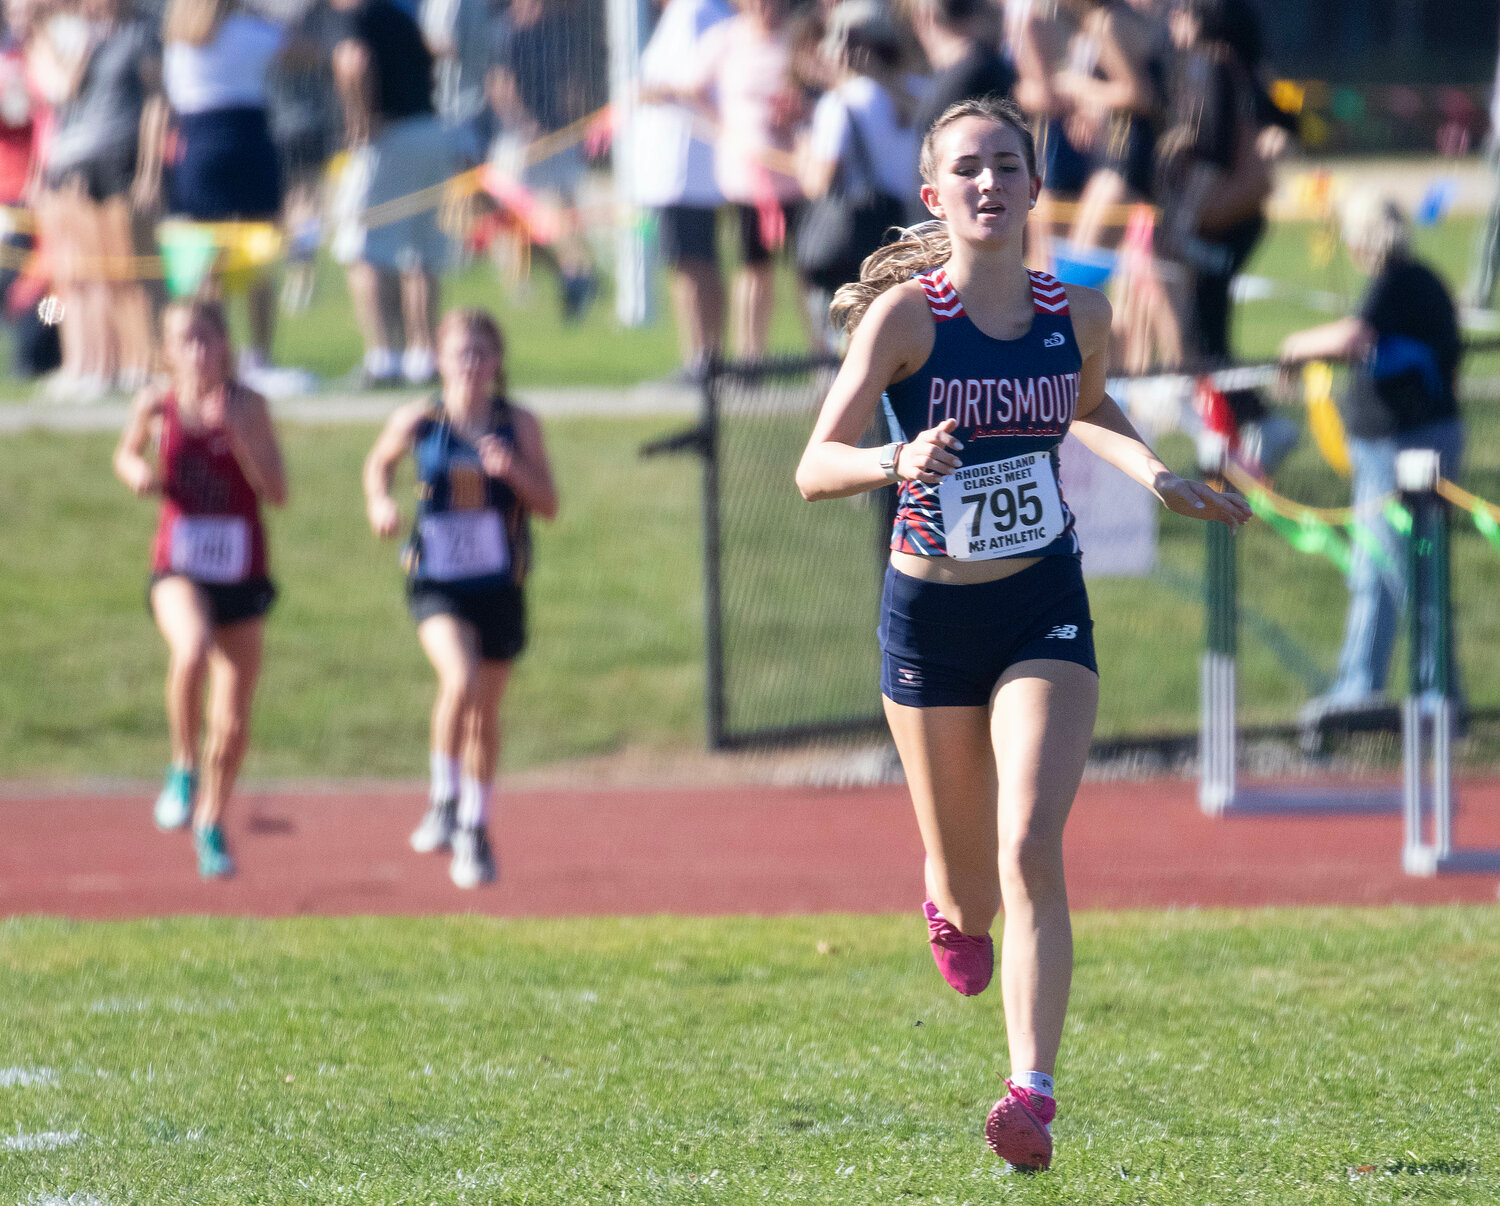 The Patriots’ Allie Kaull came in fourth place among the girls at Ponaganset Saturday. The junior ran the 5K in a time of 20:43.29.